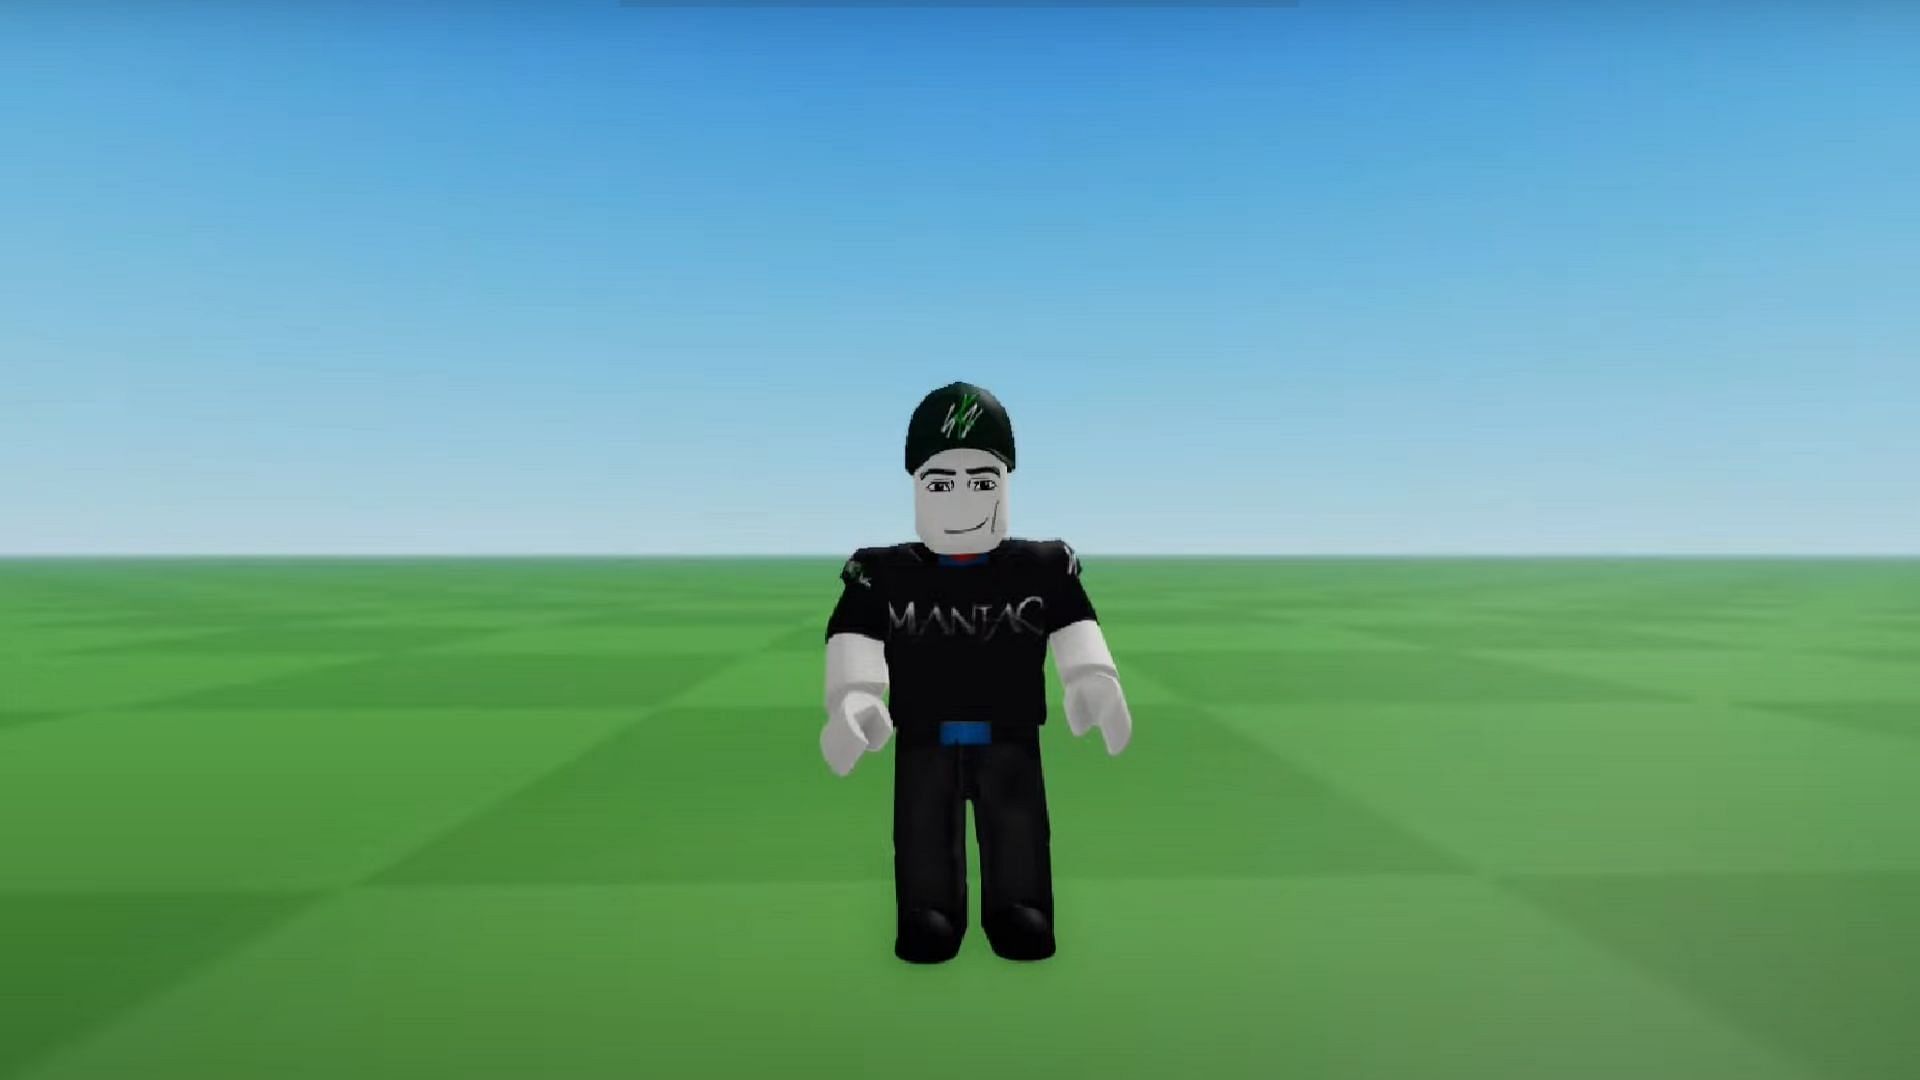 Maniac Tee when equipped (Image via RBXNEWS)